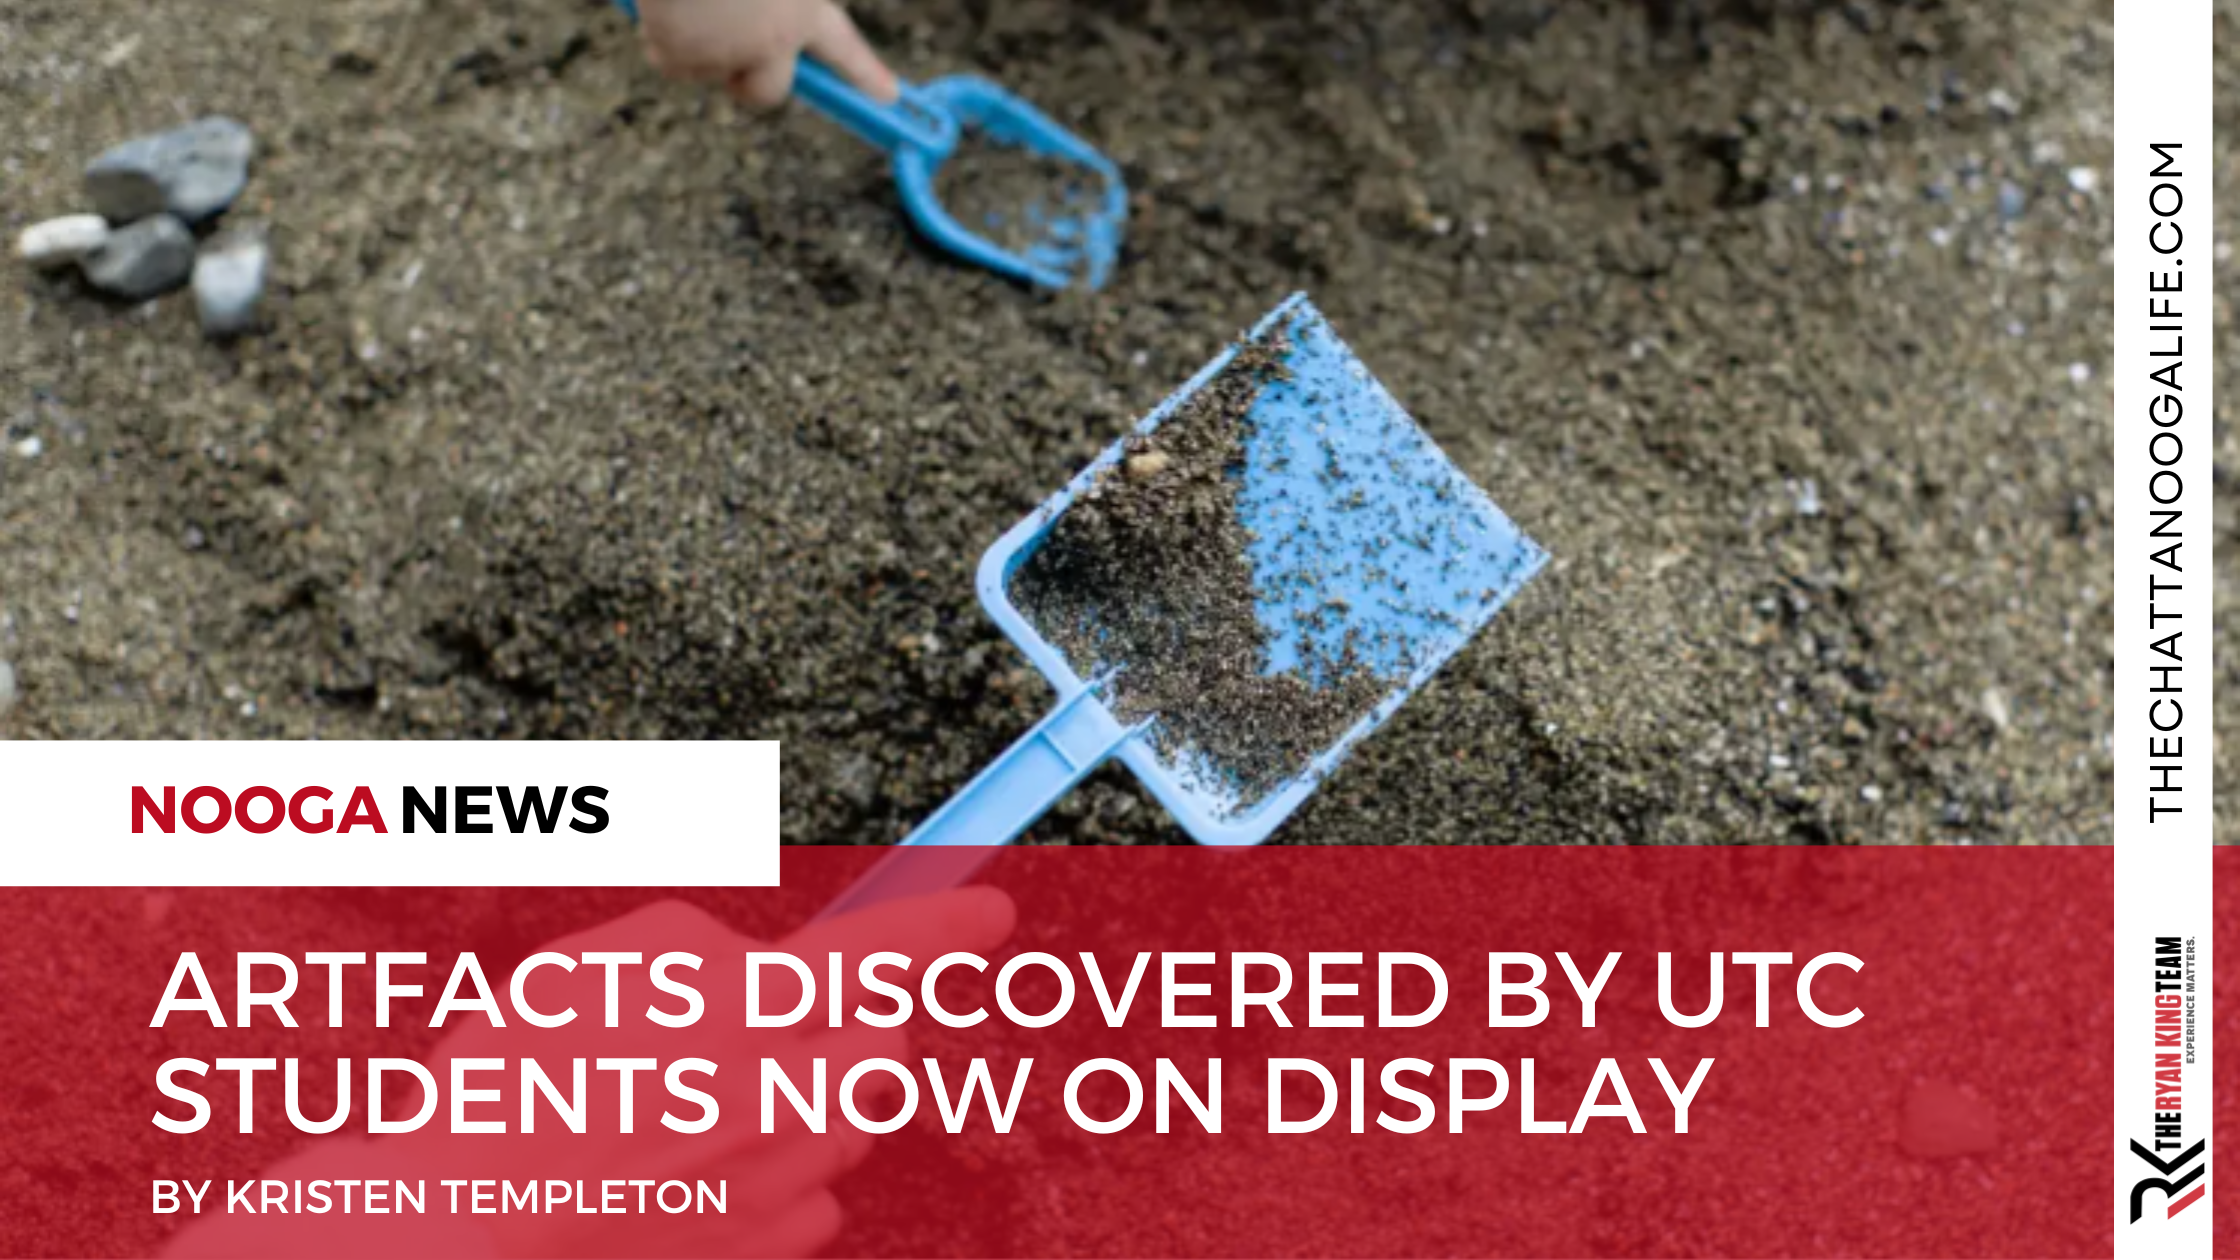 ARTFACTS DISCOVERED BY UTC STUDENTS NOW ON DISPLAY